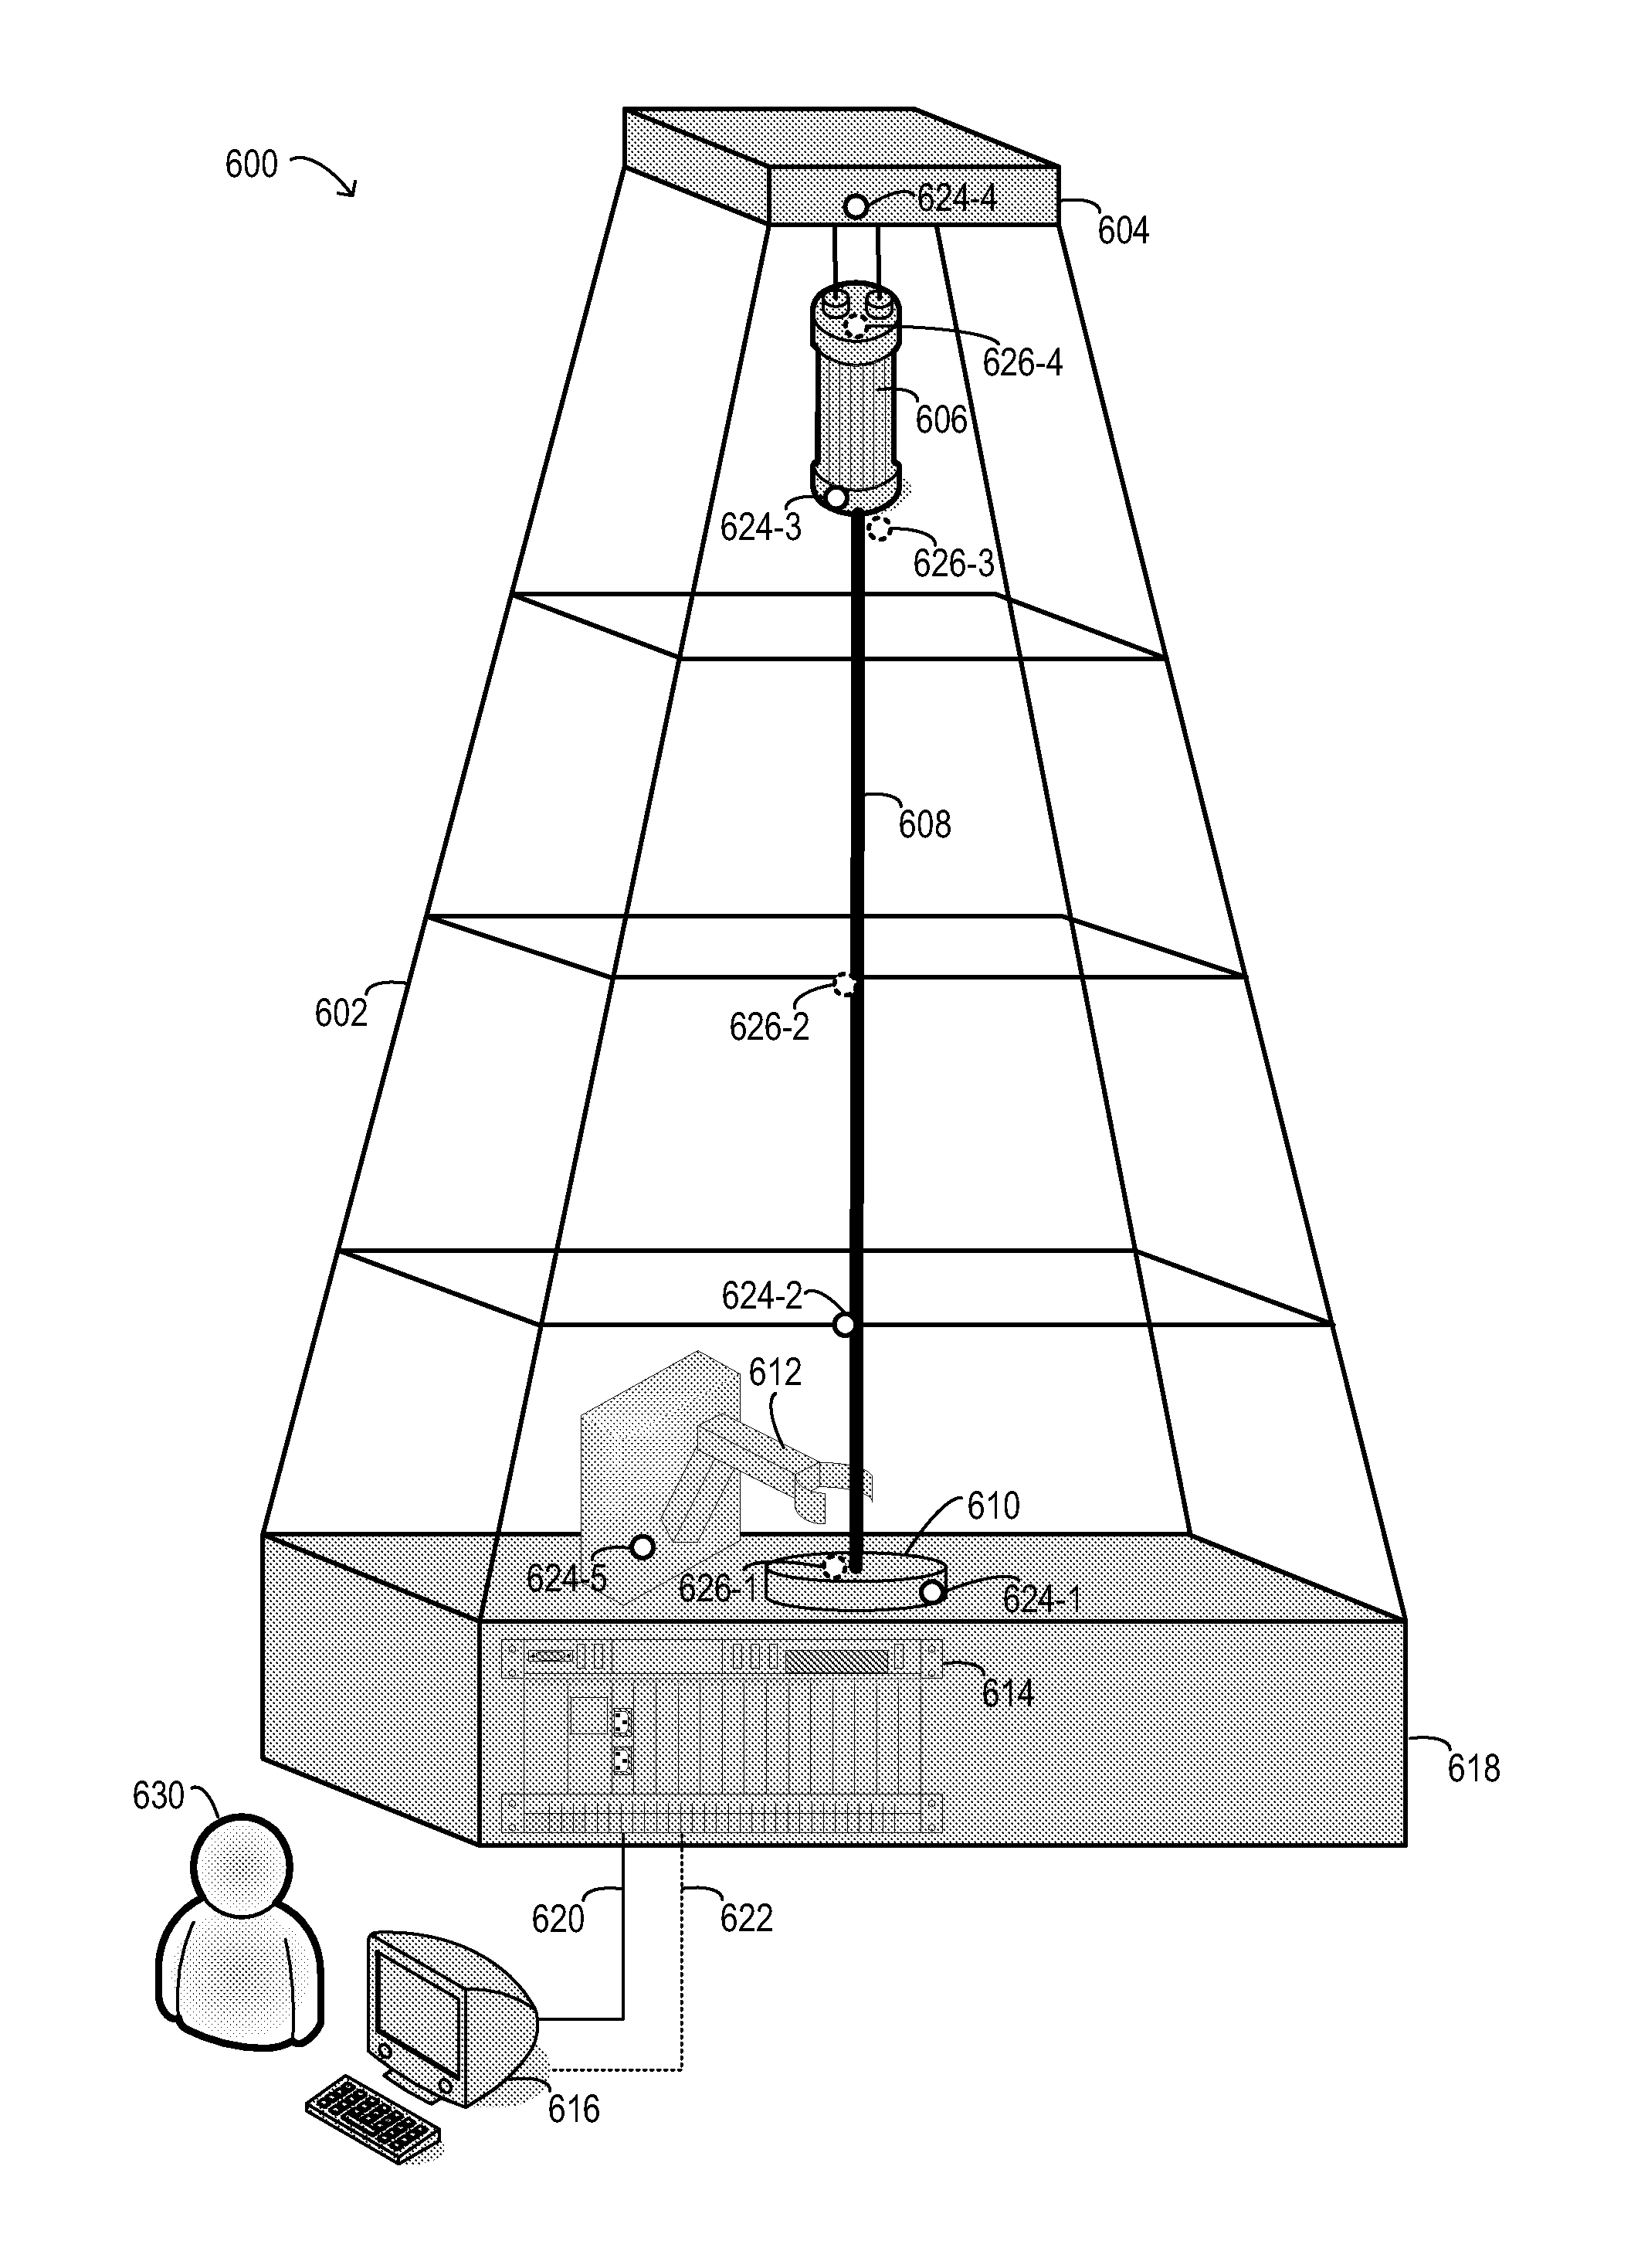 Method and system for drilling rig testing using virtualized components